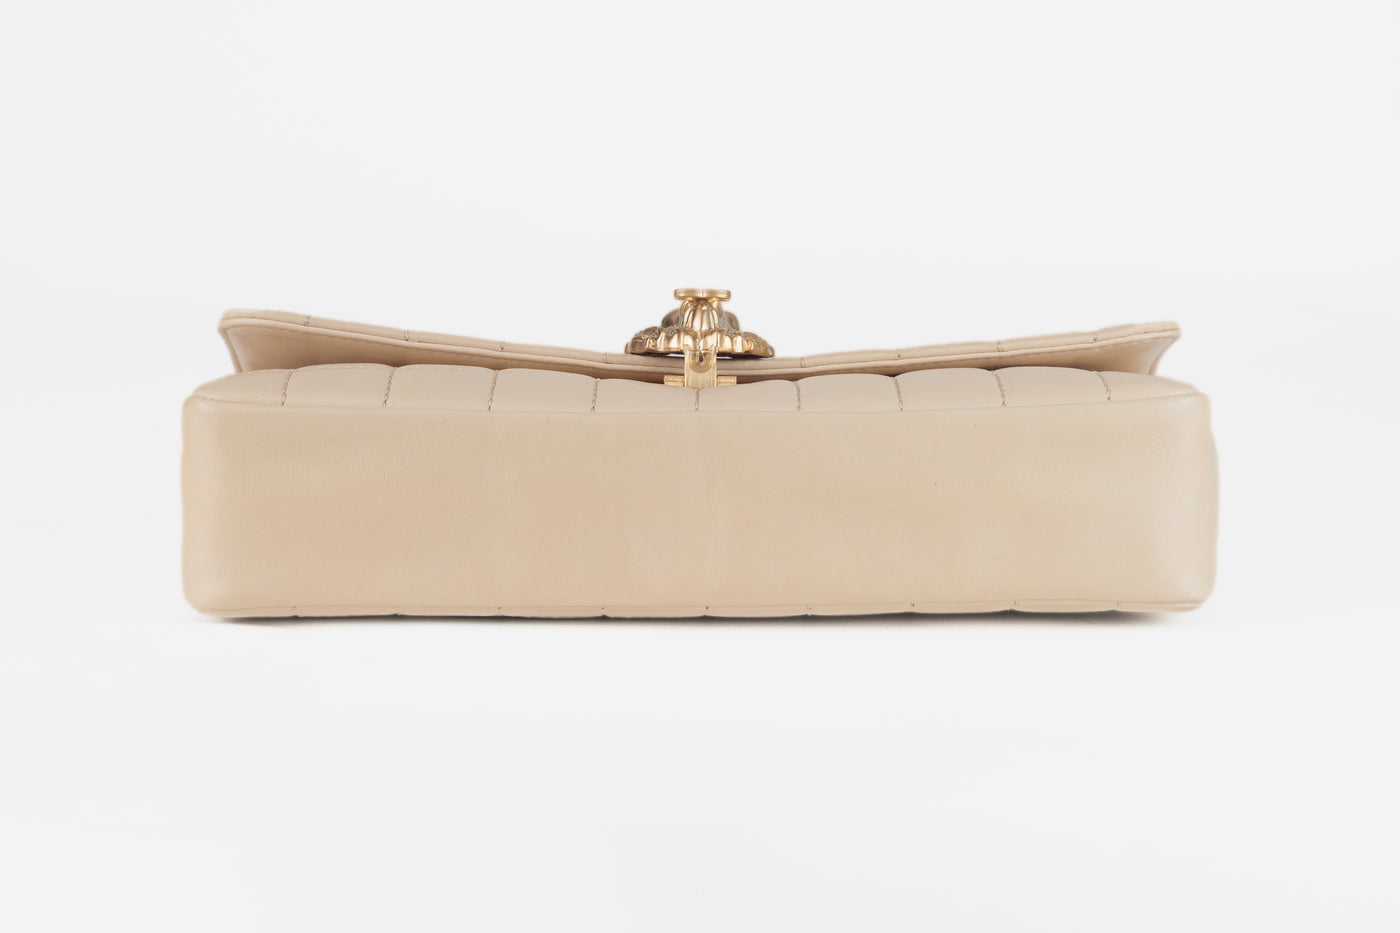 Chanel Ivory Chocolate Bar Flap Bag with Gold Lion Head Clasp